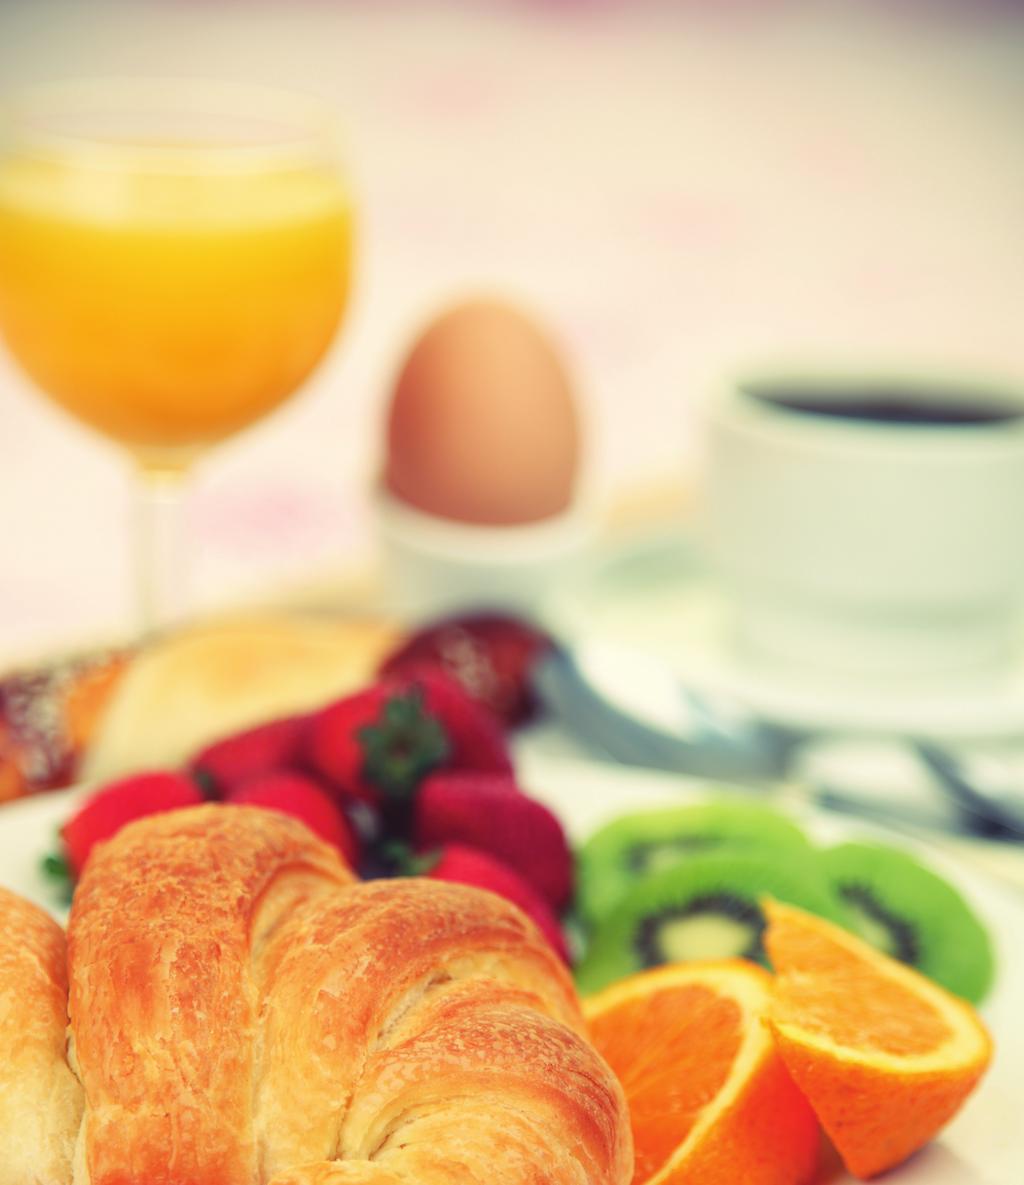 a F p u C d o G BREAKFAST Continenta Breakfast Served 10:30 am 11:45 am Chied Orange, Cranberry and Grapefruit Juices, Botted Water, Assorted Breakfast Breads and Buid Your Own Parfait (incudes Vania